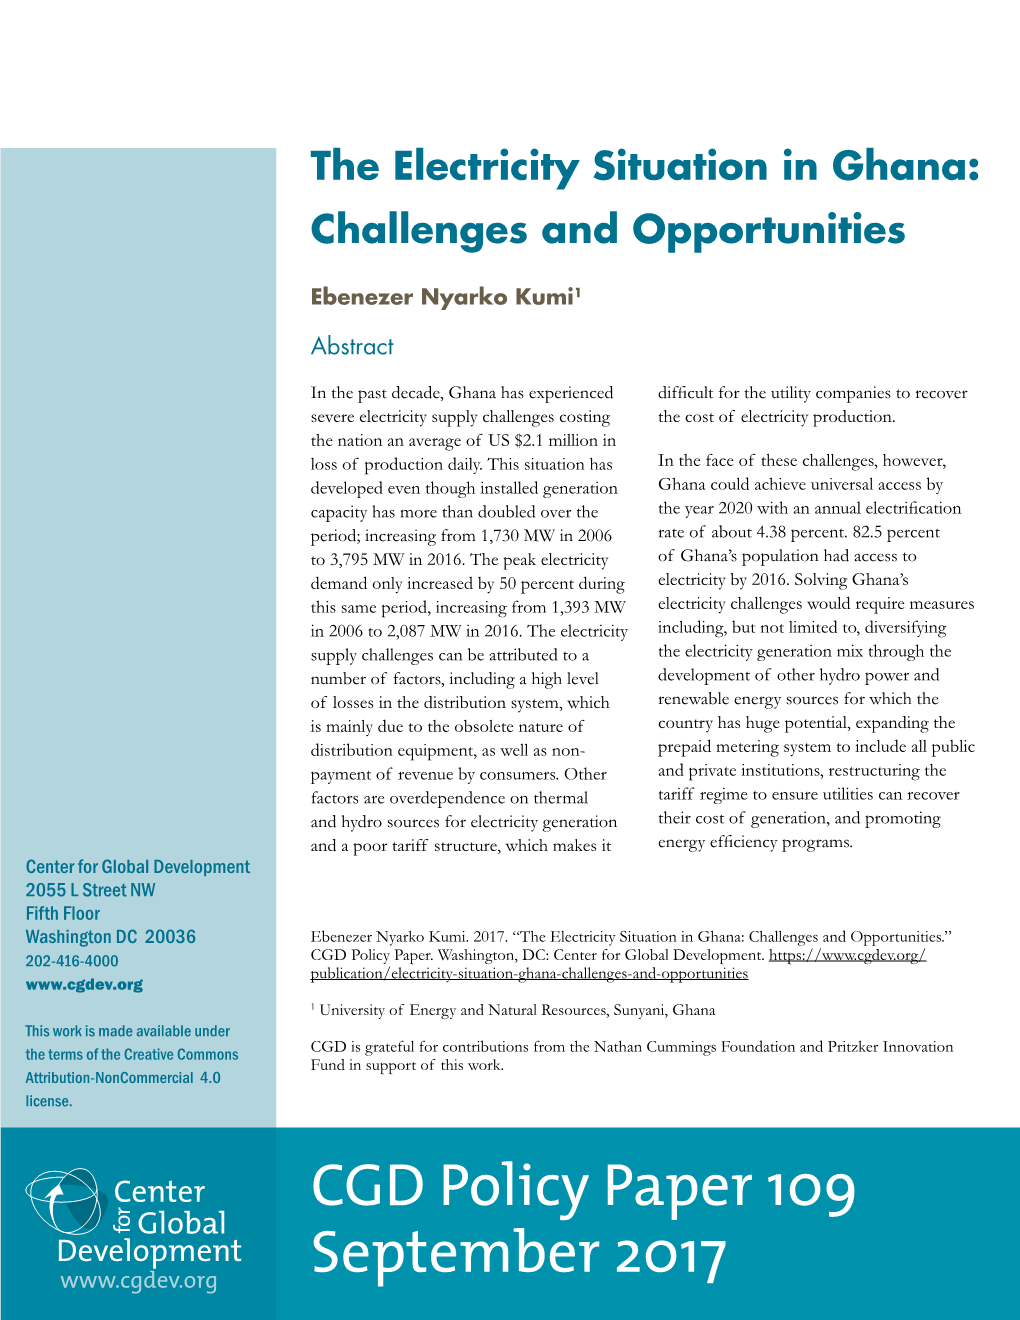 The Electricity Situation in Ghana: Challenges and Opportunities